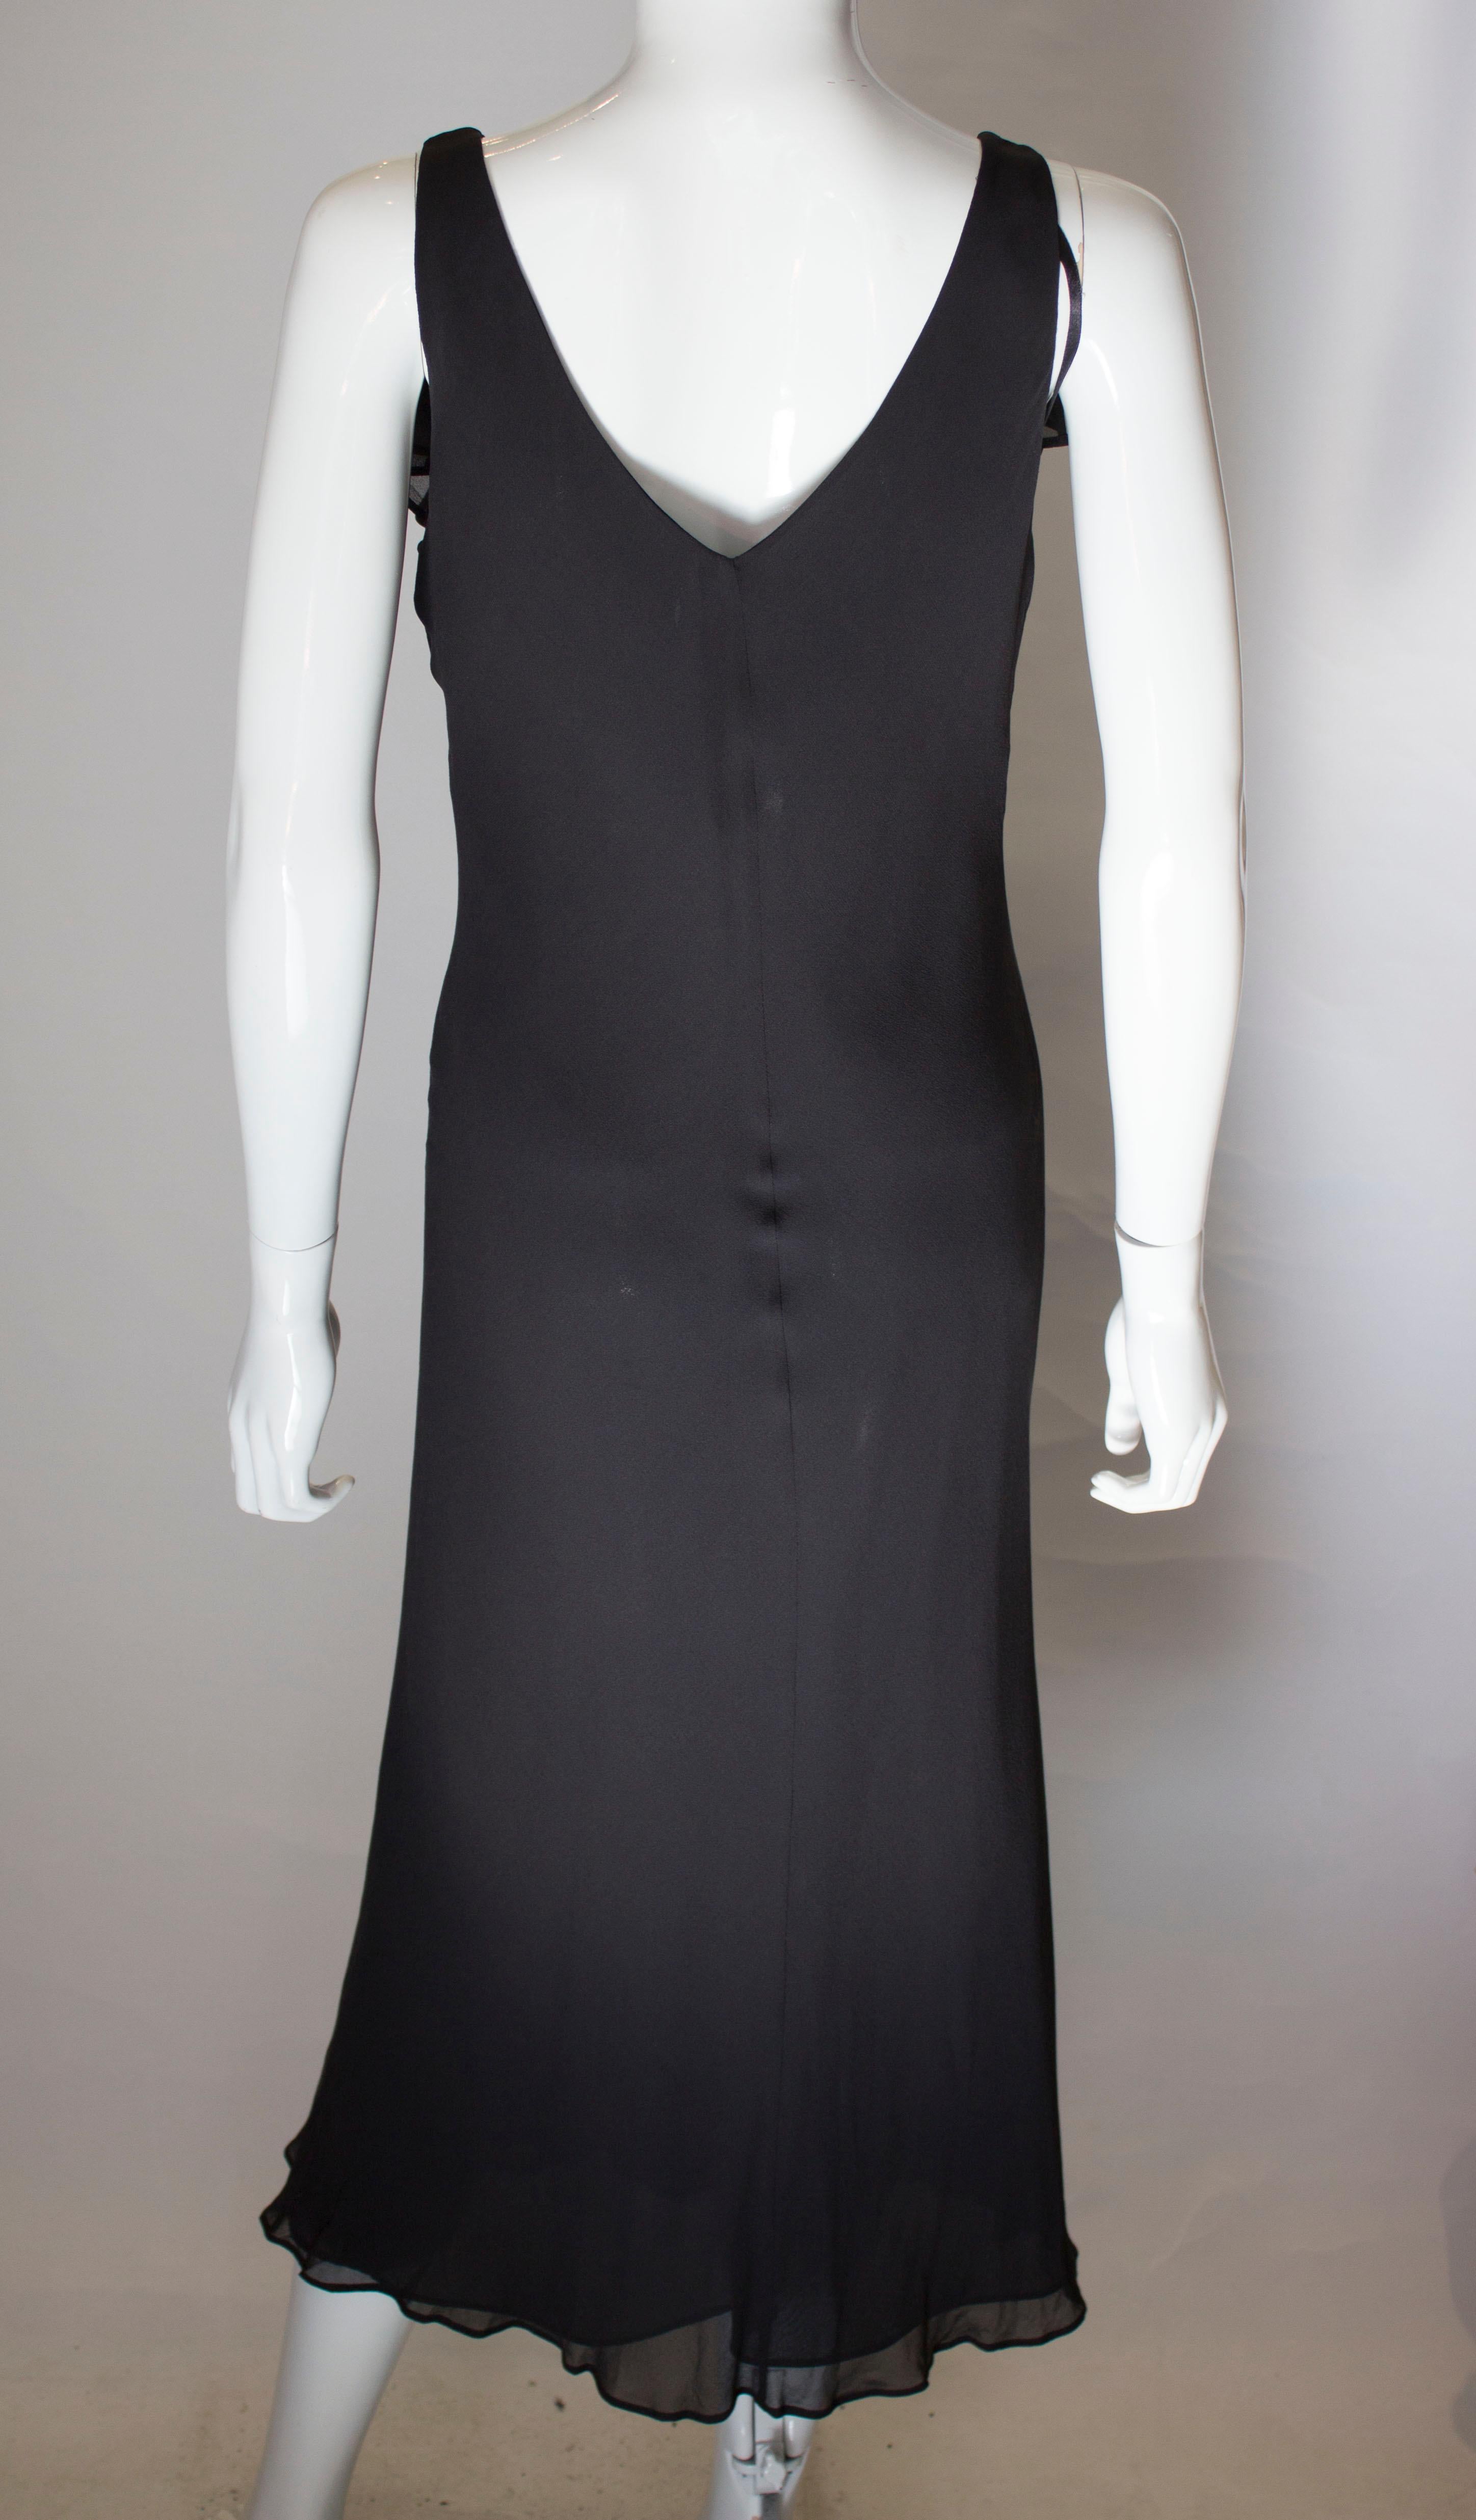 Vintage Slip Dress with Ruffle at Neckline For Sale 3